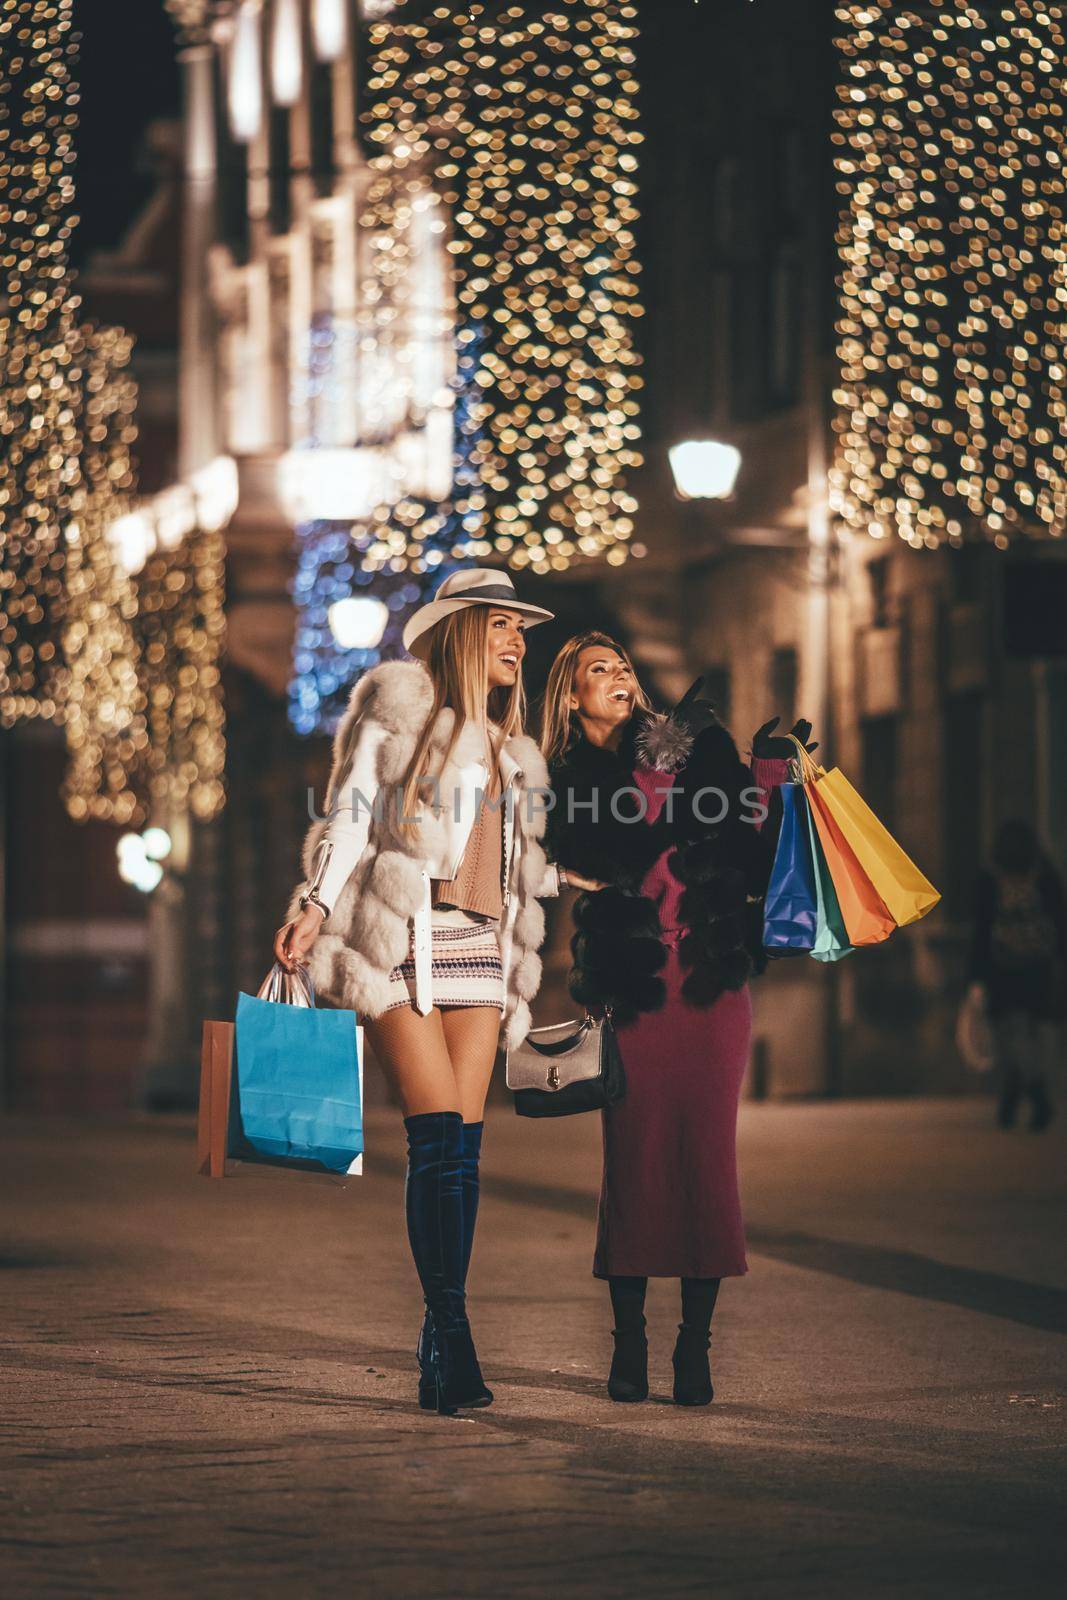 Young beautiful two cheerful sisters, with colorful shopping bags, having fun and walking in the night city street at Christmas time.